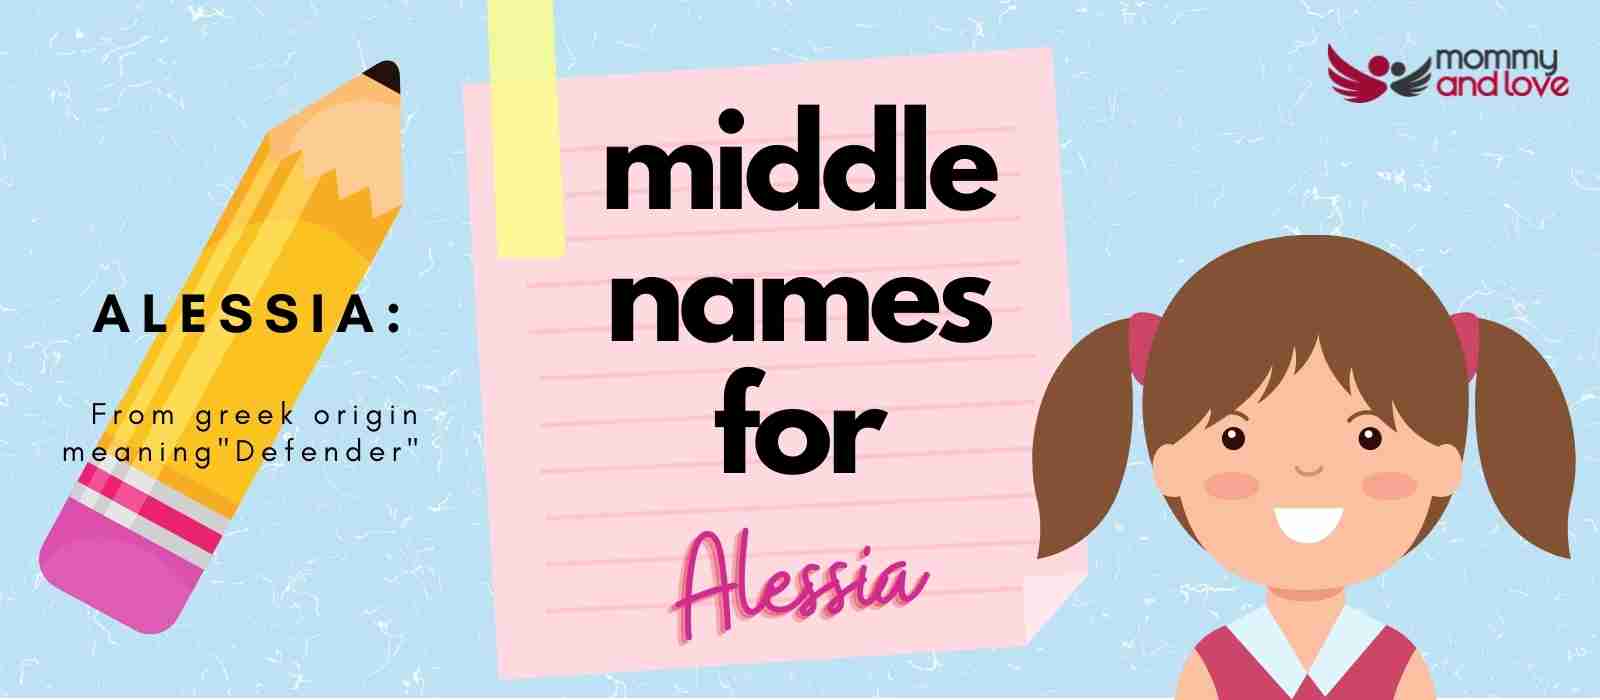 Middle Names for Alessia